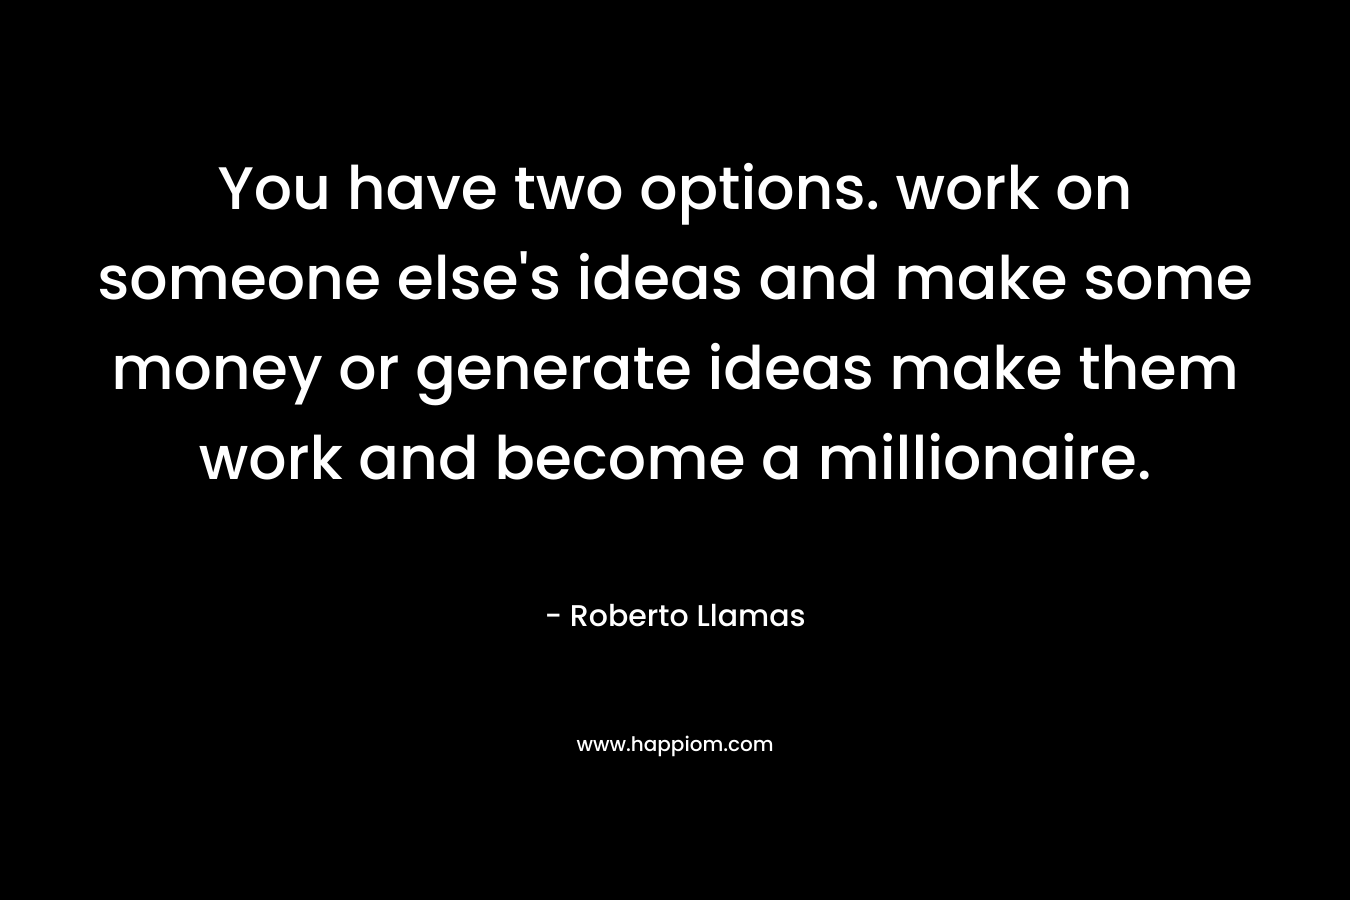 You have two options. work on someone else’s ideas and make some money or generate ideas make them work and become a millionaire. – Roberto Llamas